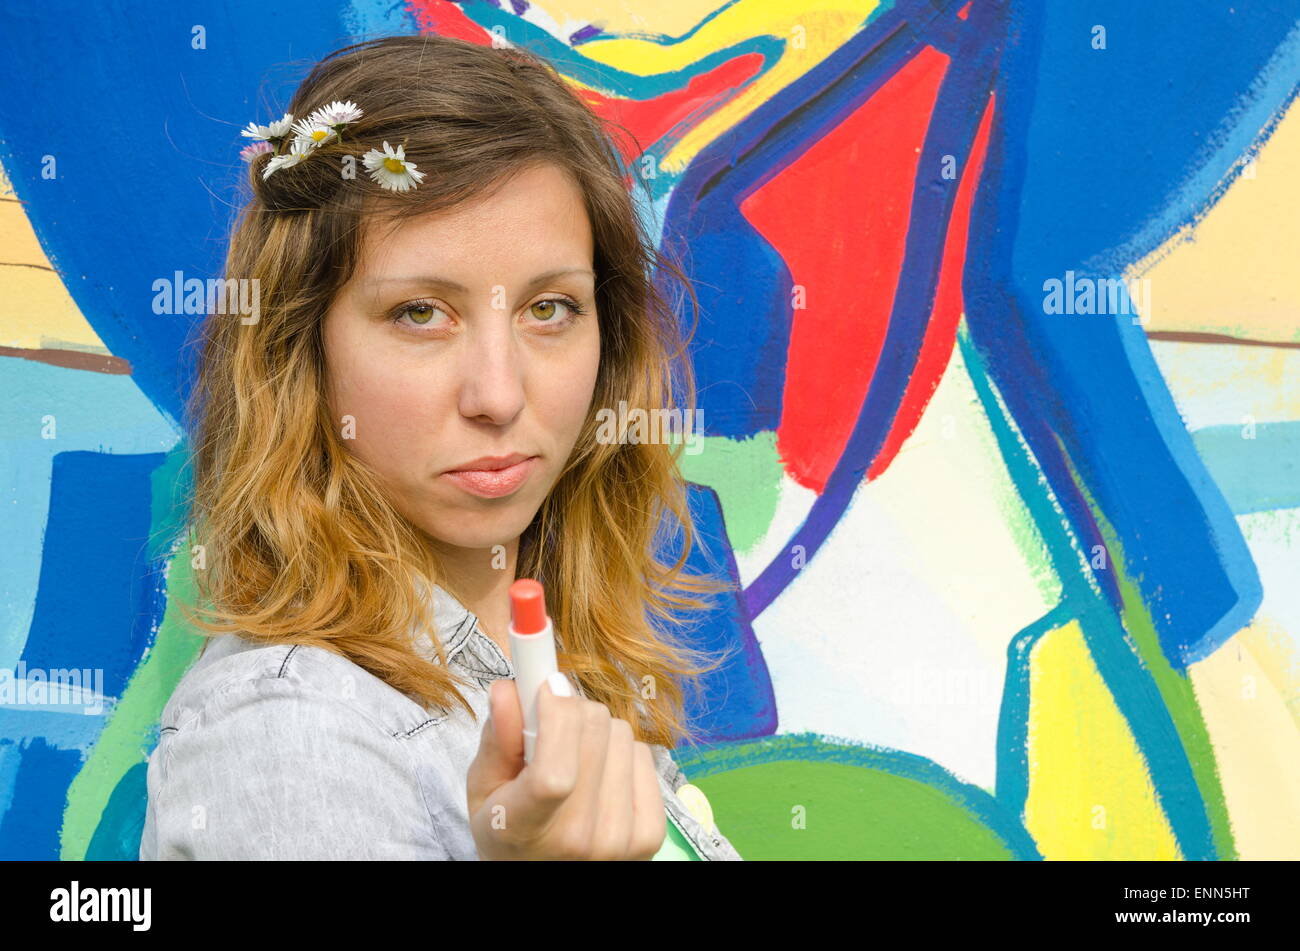 Brunette girl posing against a colorful backdrop holding lipstick Stock Photo